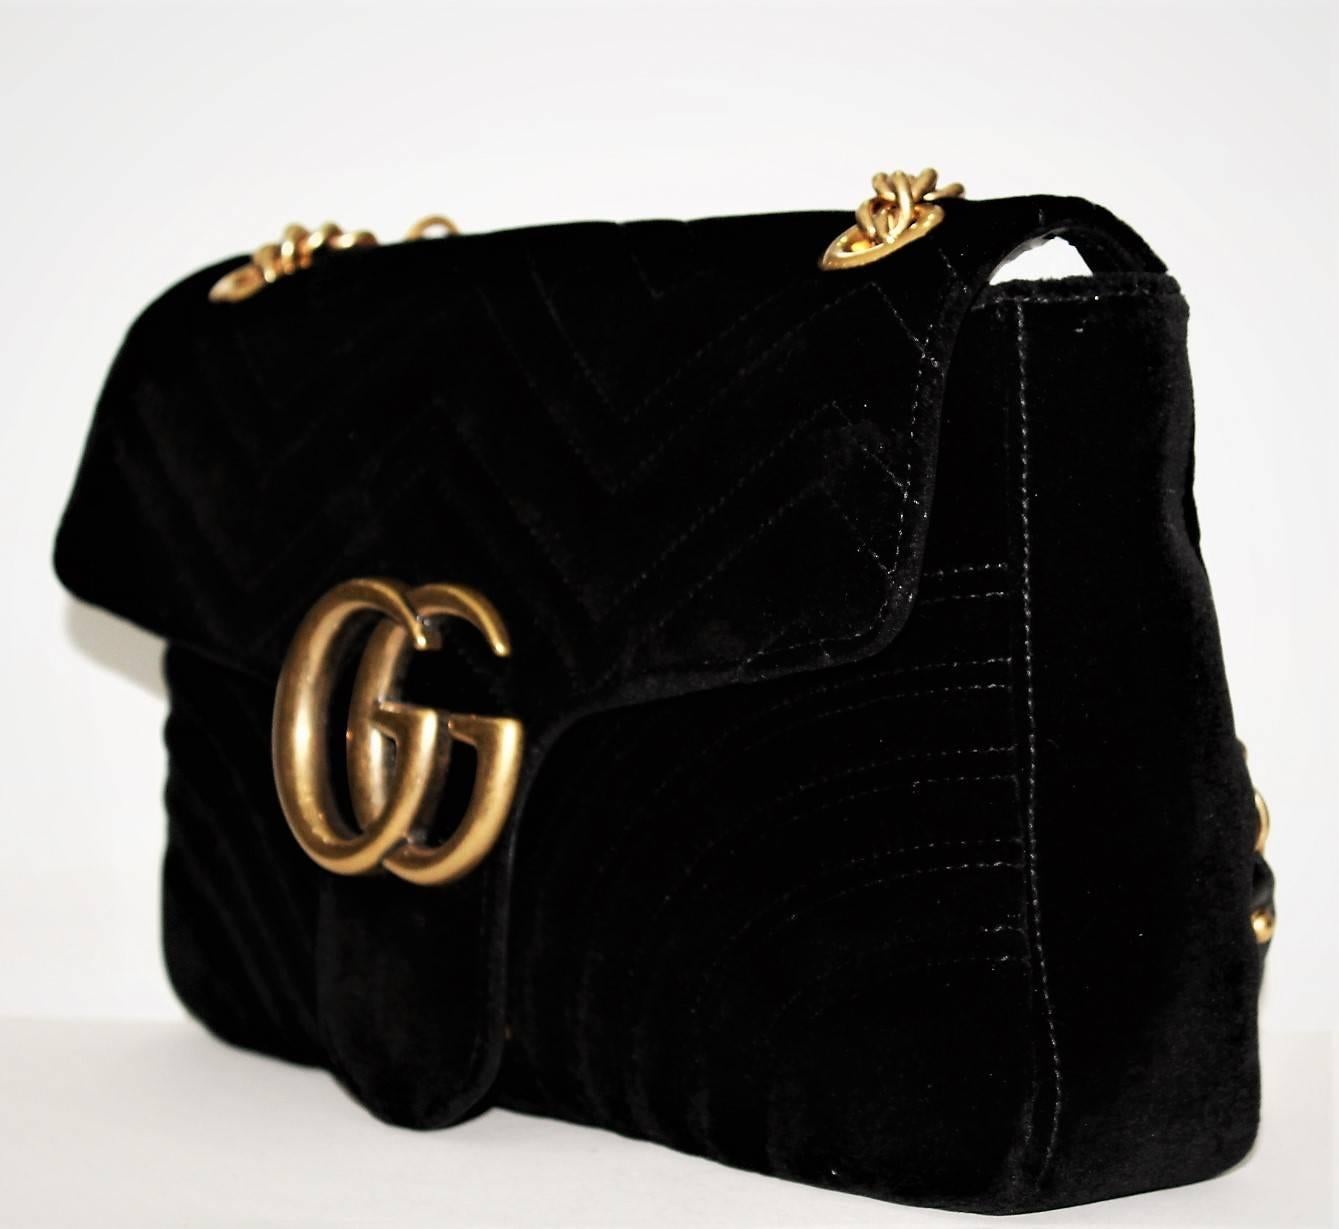 The medium GG Marmont chain shoulder bag has a softly structured shape and an oversized flap closure with Double G hardware. The sliding chain strap can be worn multiple ways, changing between a shoulder and a top handle bag. Made in embroidered